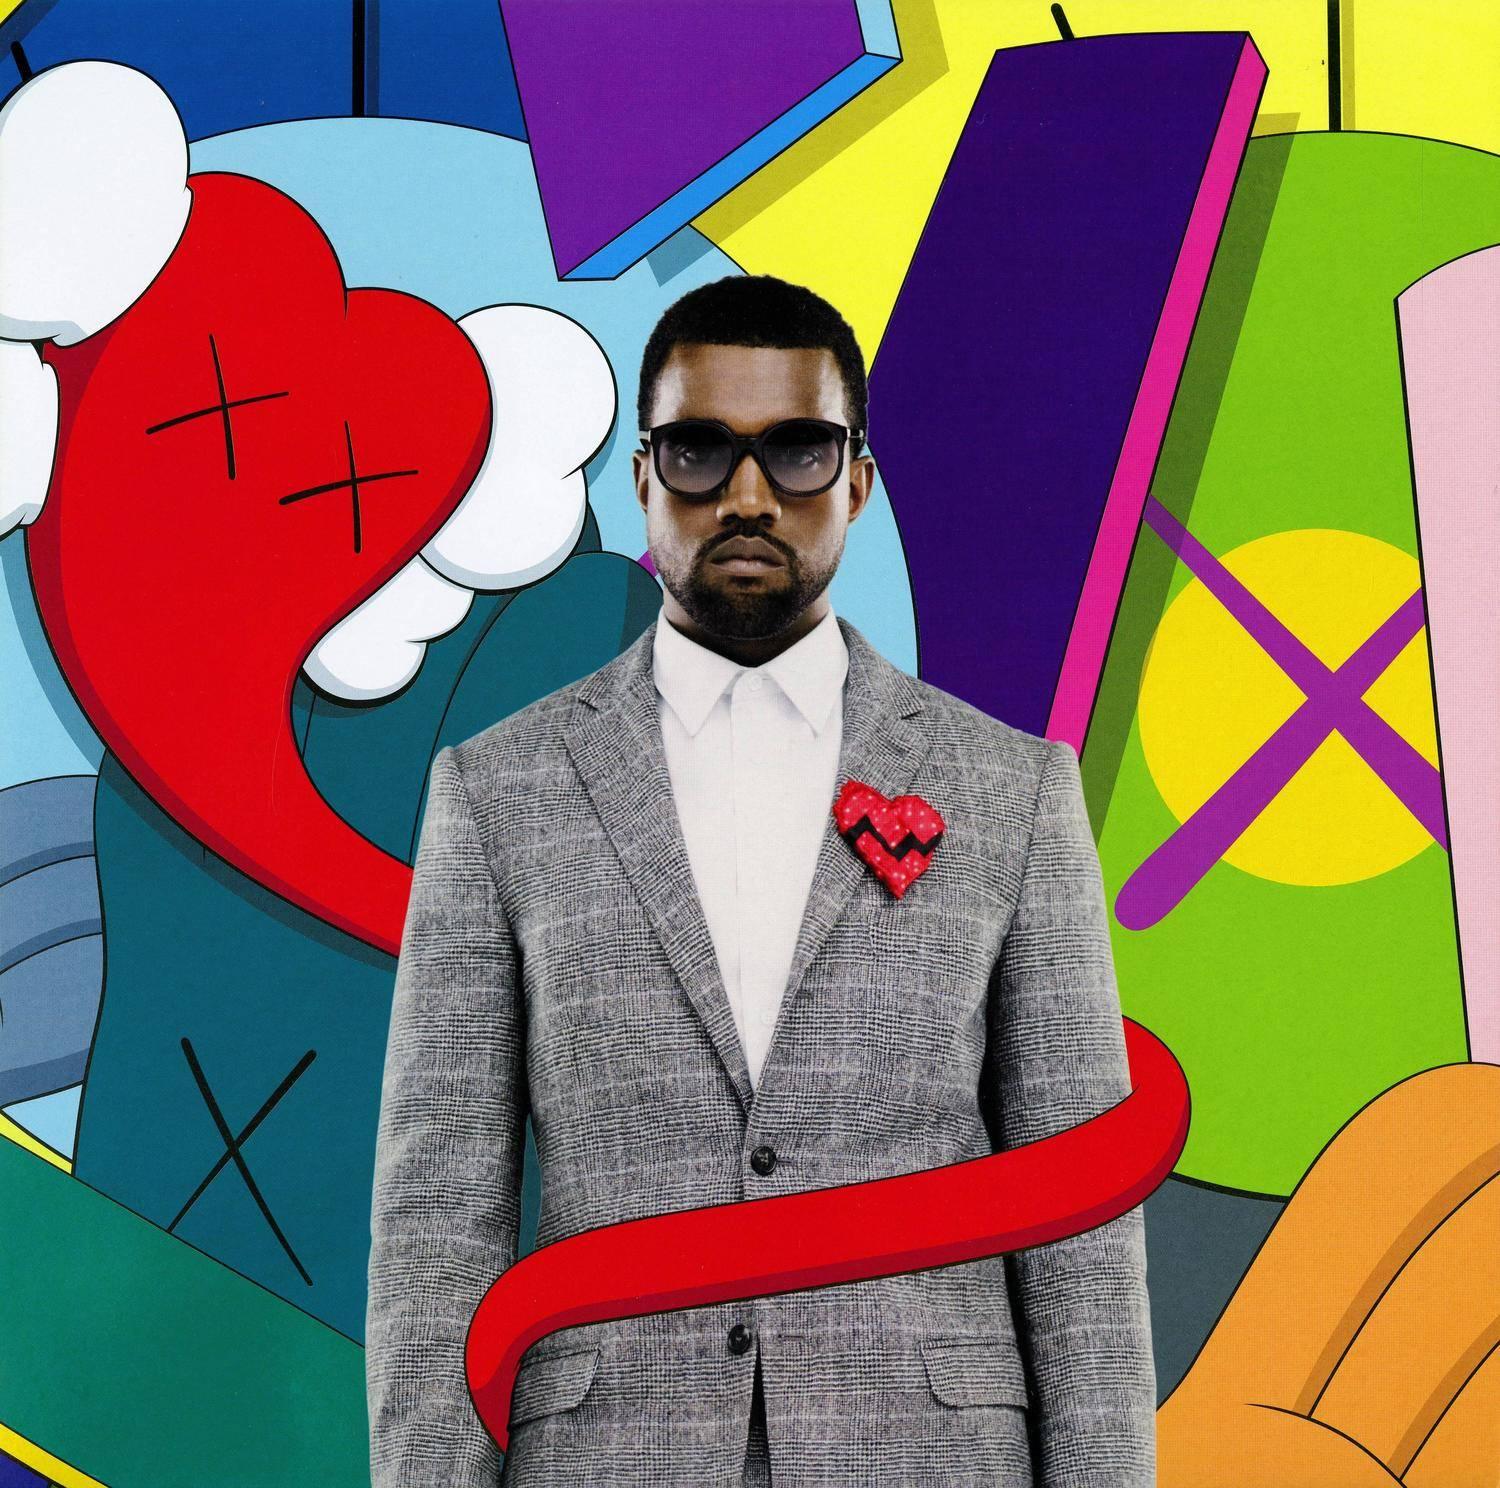 KAWS Record Art 2008 (Kanye West 808s and Heartbreak 1st pressing) 3